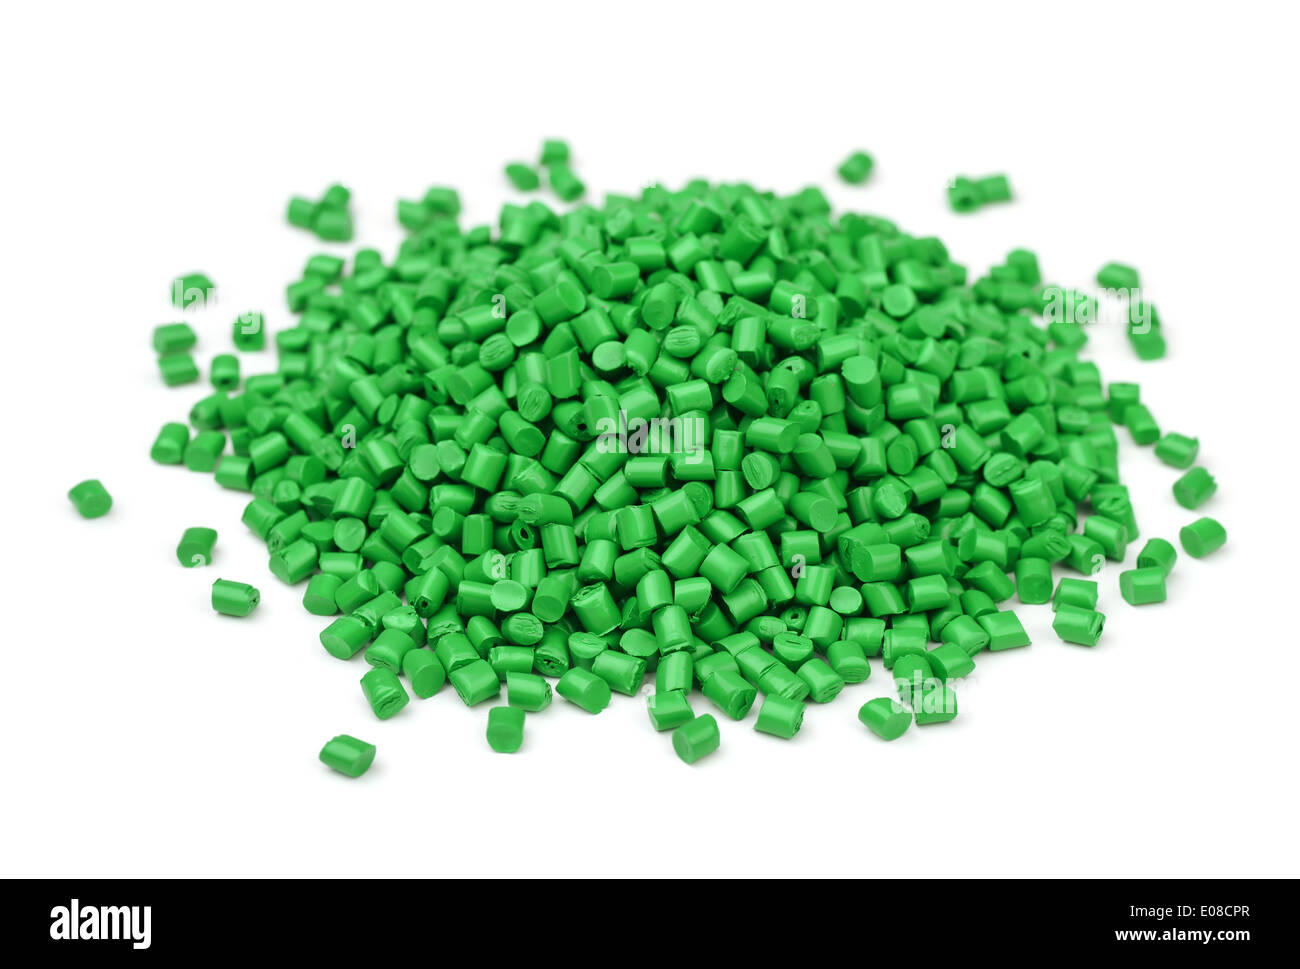 Pile of green polymer granules isolated on white Stock Photo